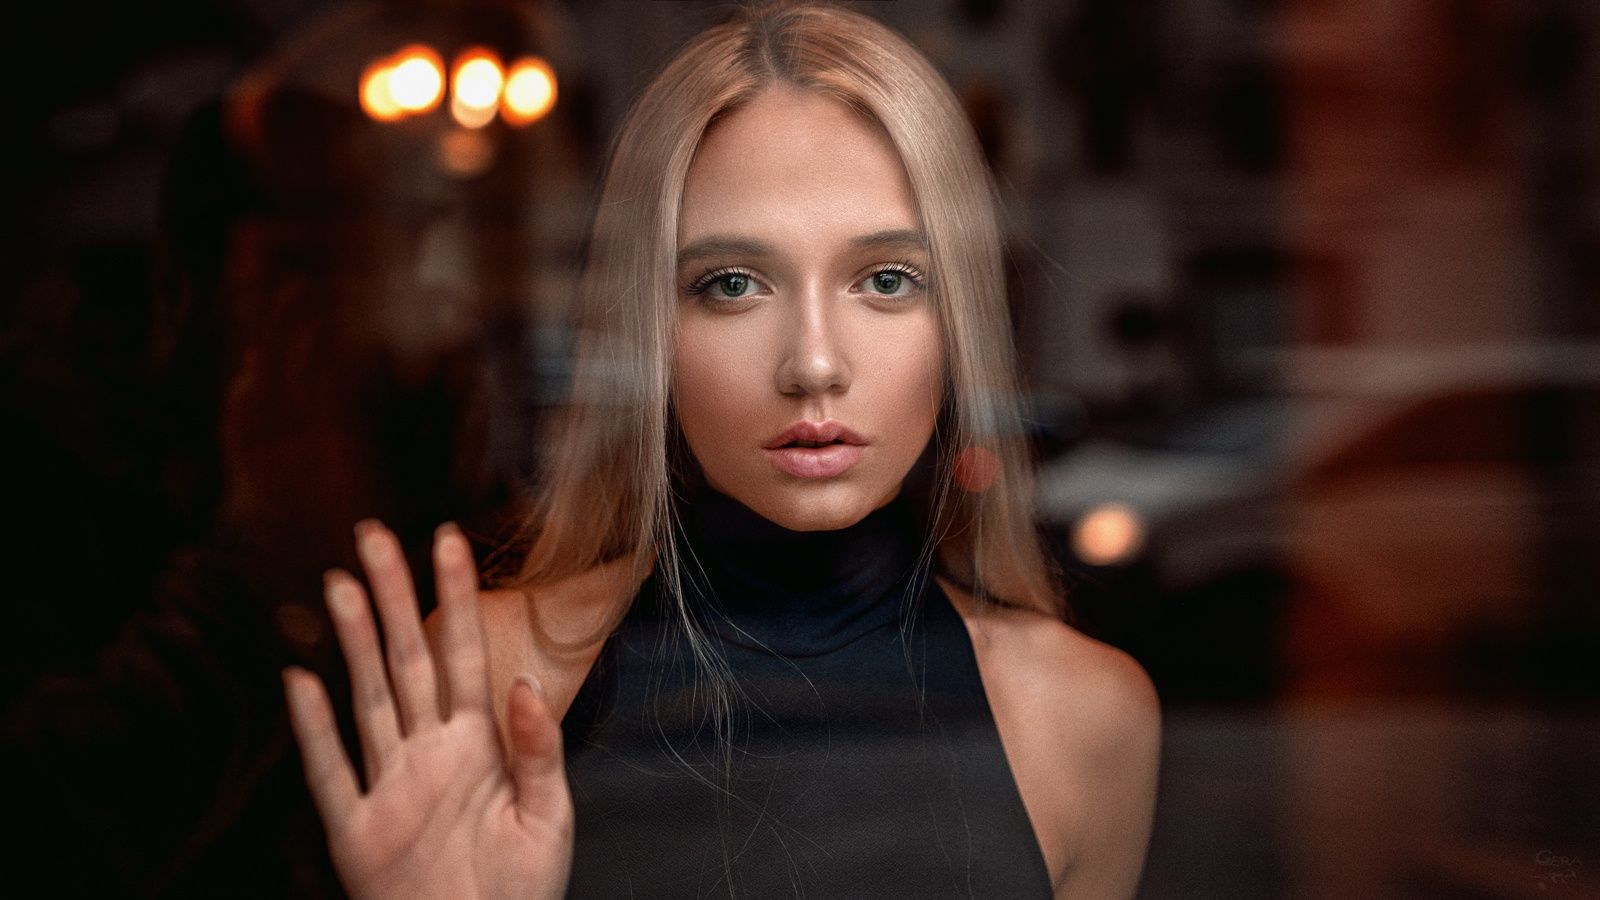 People 1600x900 Georgy Chernyadyev Maria Popova women blonde long hair straight hair glass blouses black clothing portrait behind the glass hands on glass makeup